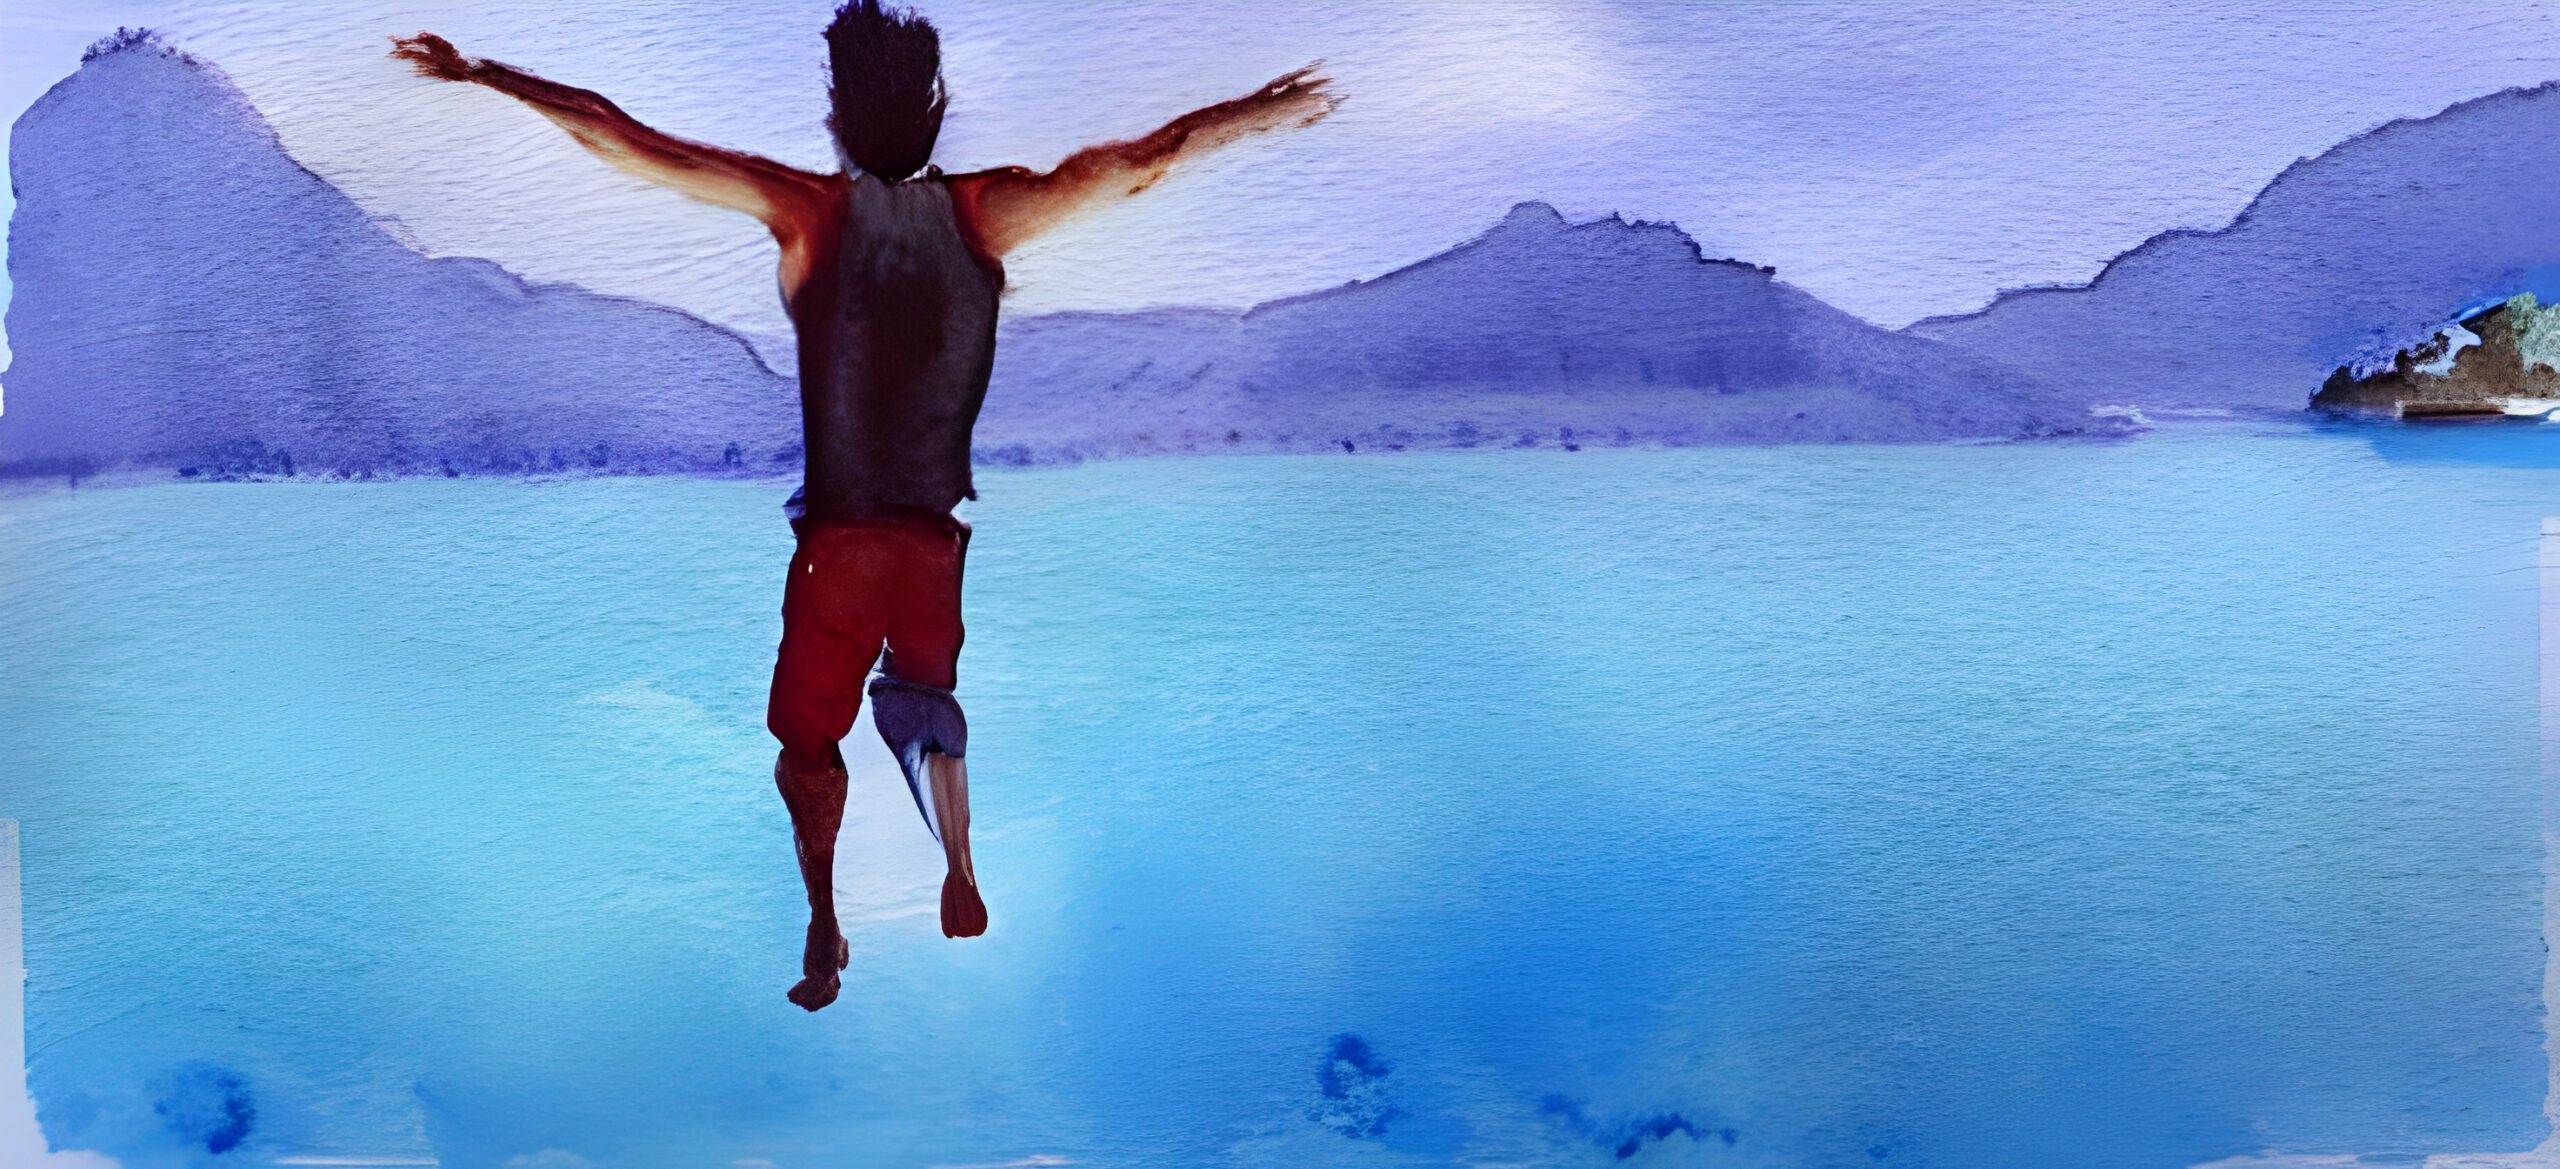 painting of a man jumping into a lake to symbolize getting out of a rut